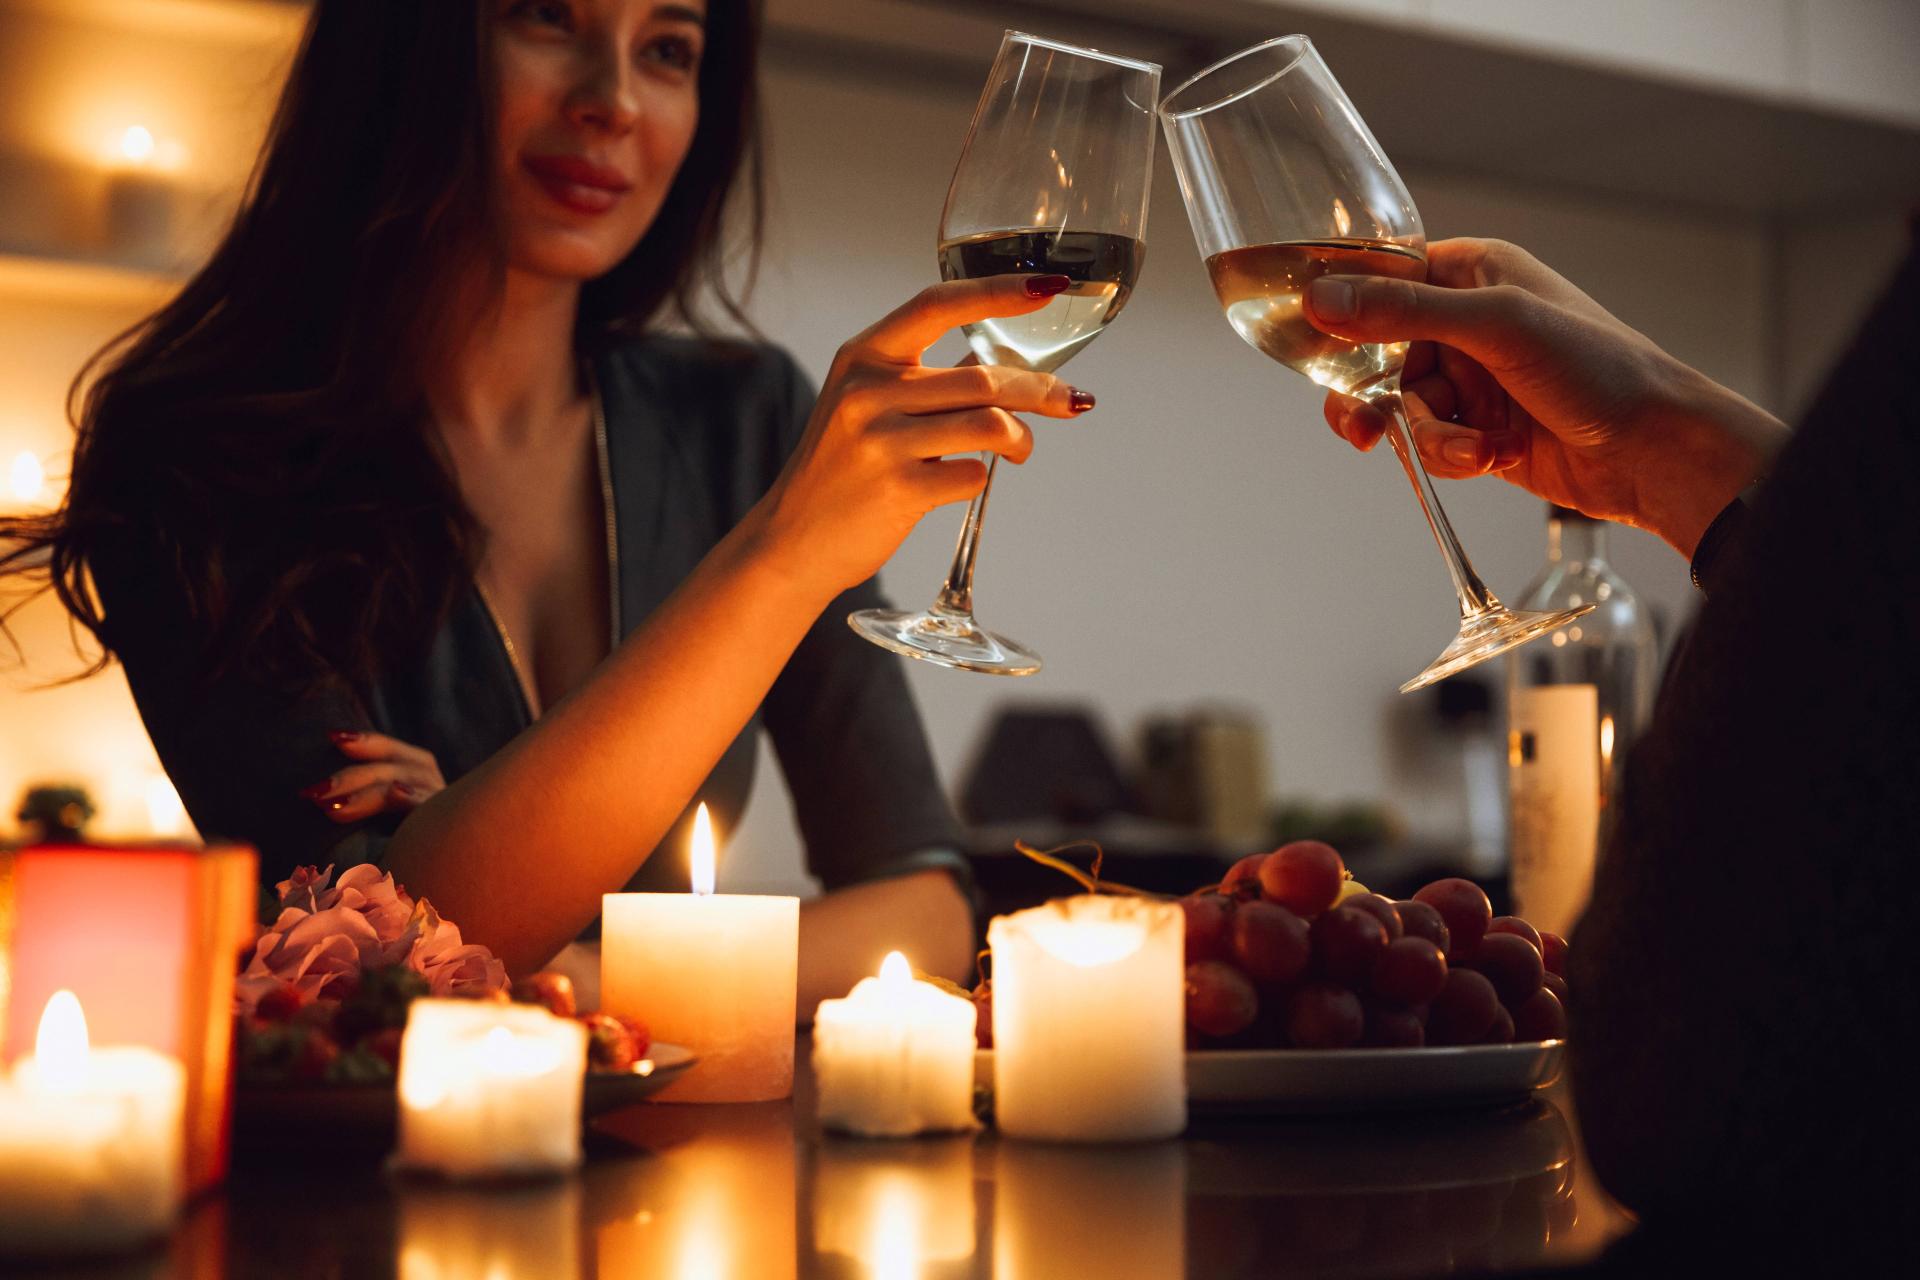 couple clinking wine glasses over an intimate romantic dinner